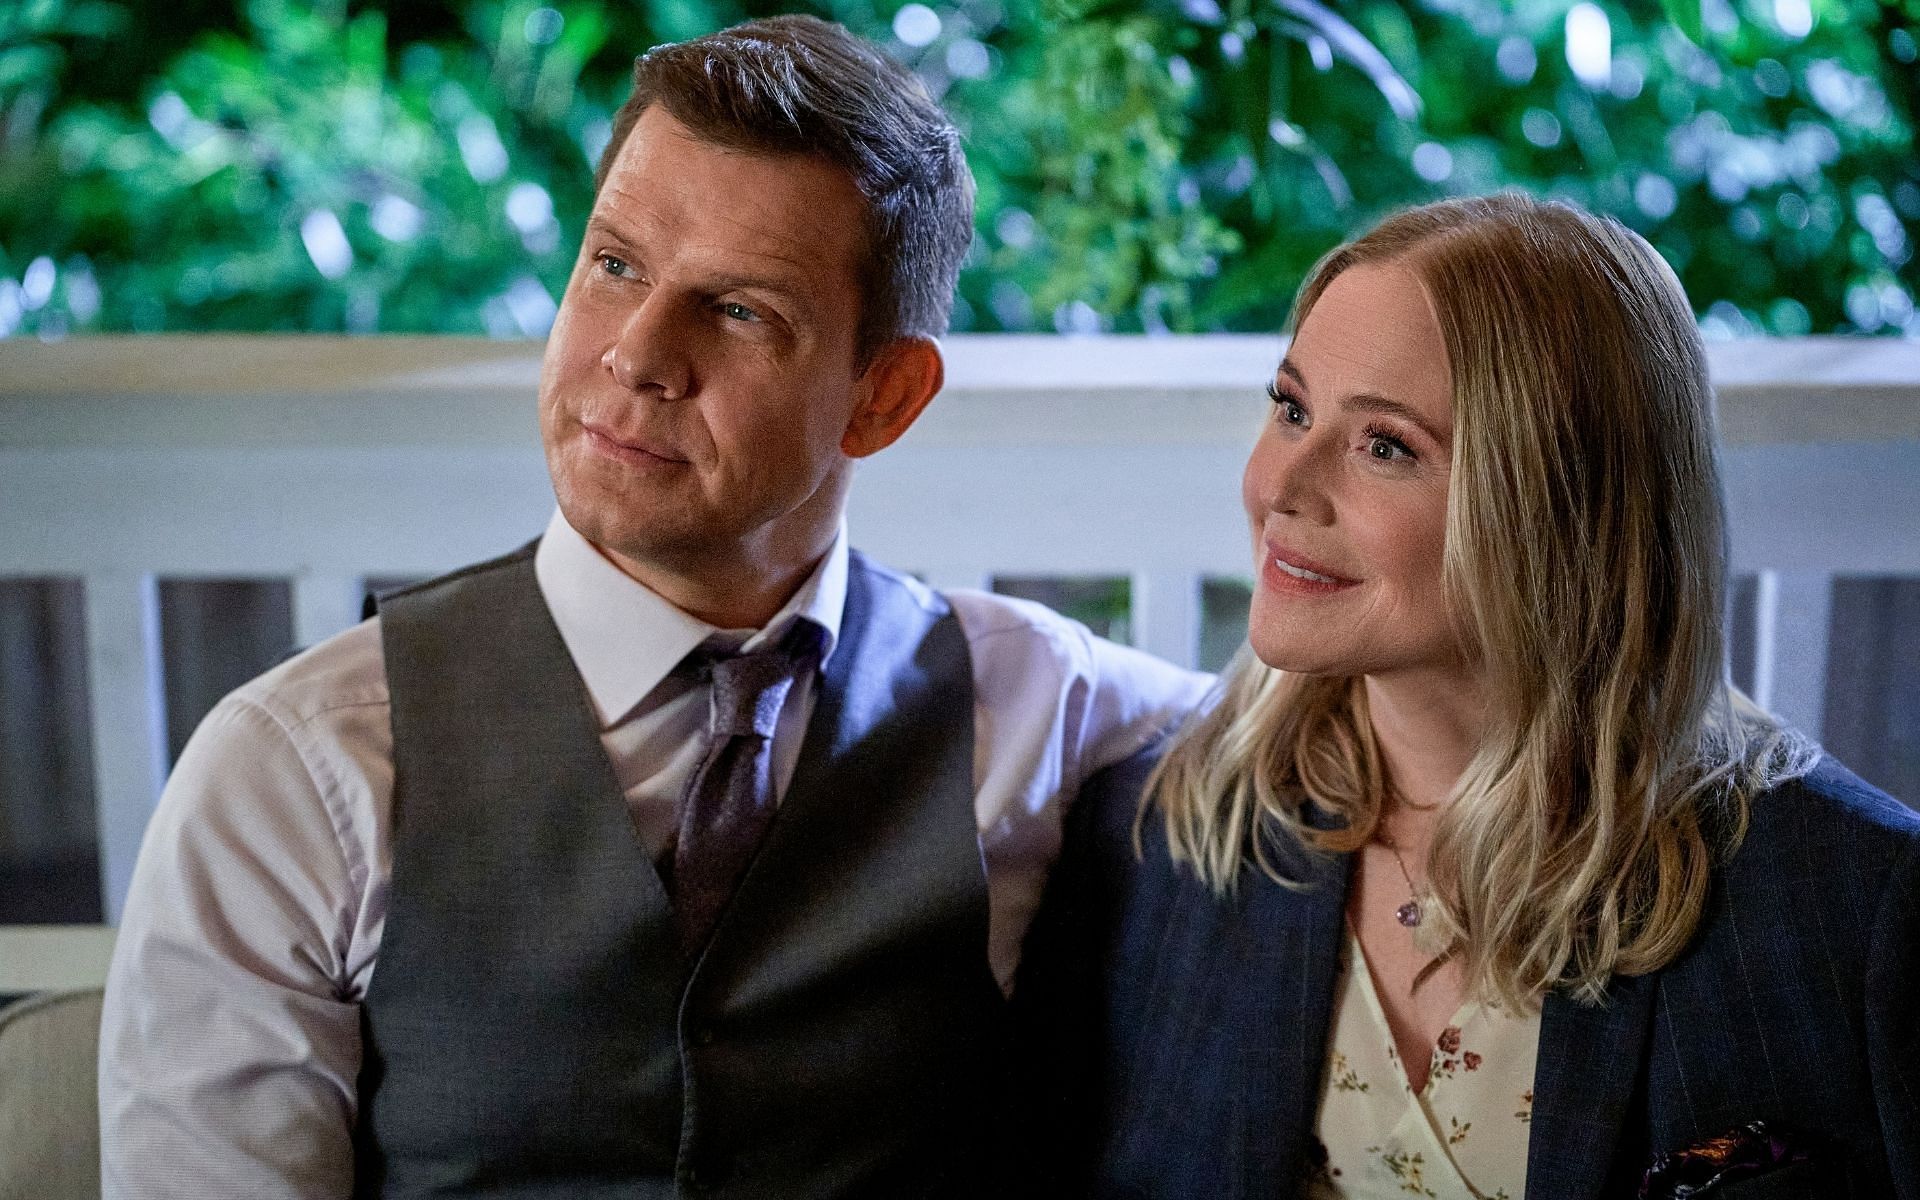 Eric Mabius and Kristin Booth in Signed, Sealed, Delivered: The Vows We Have Made (Image via Hallmark)